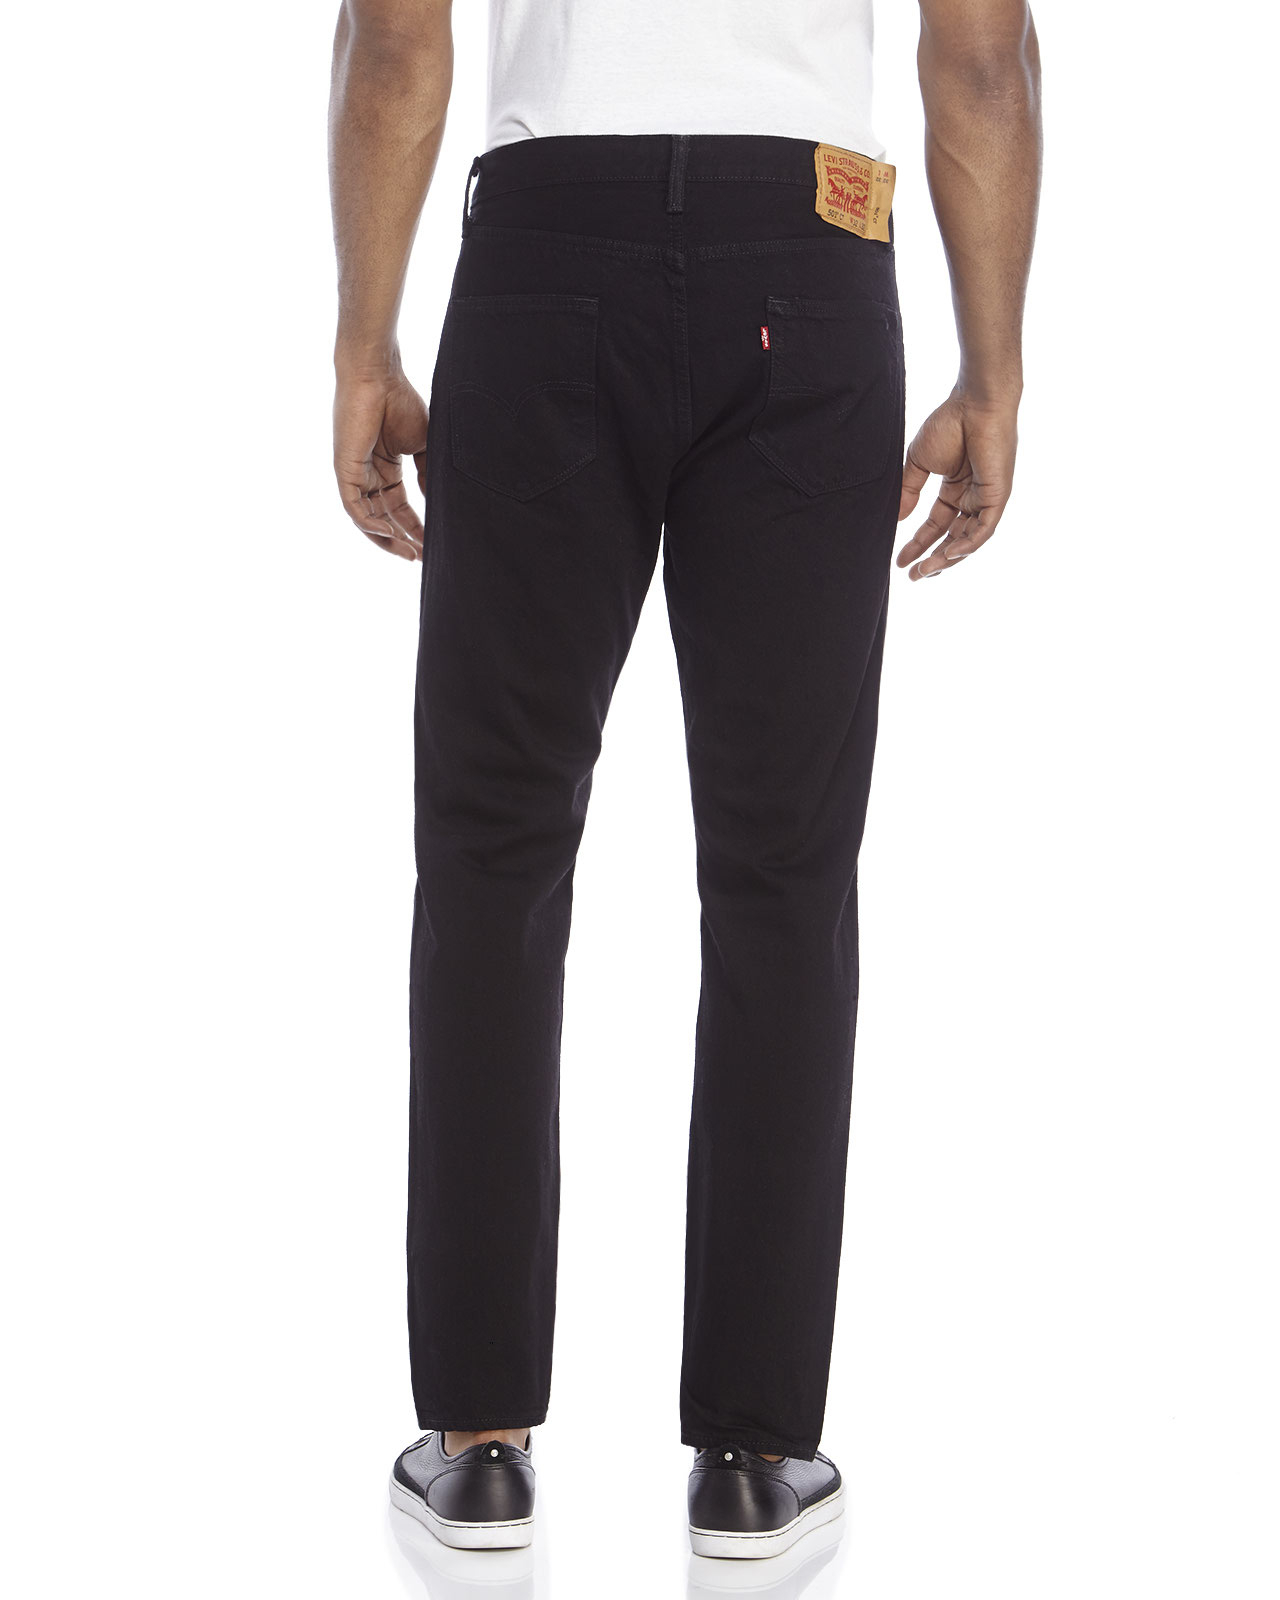 Lyst - Levi's Levi's 519 Super Skinny Jeans Rooftop Black Rinse in ...